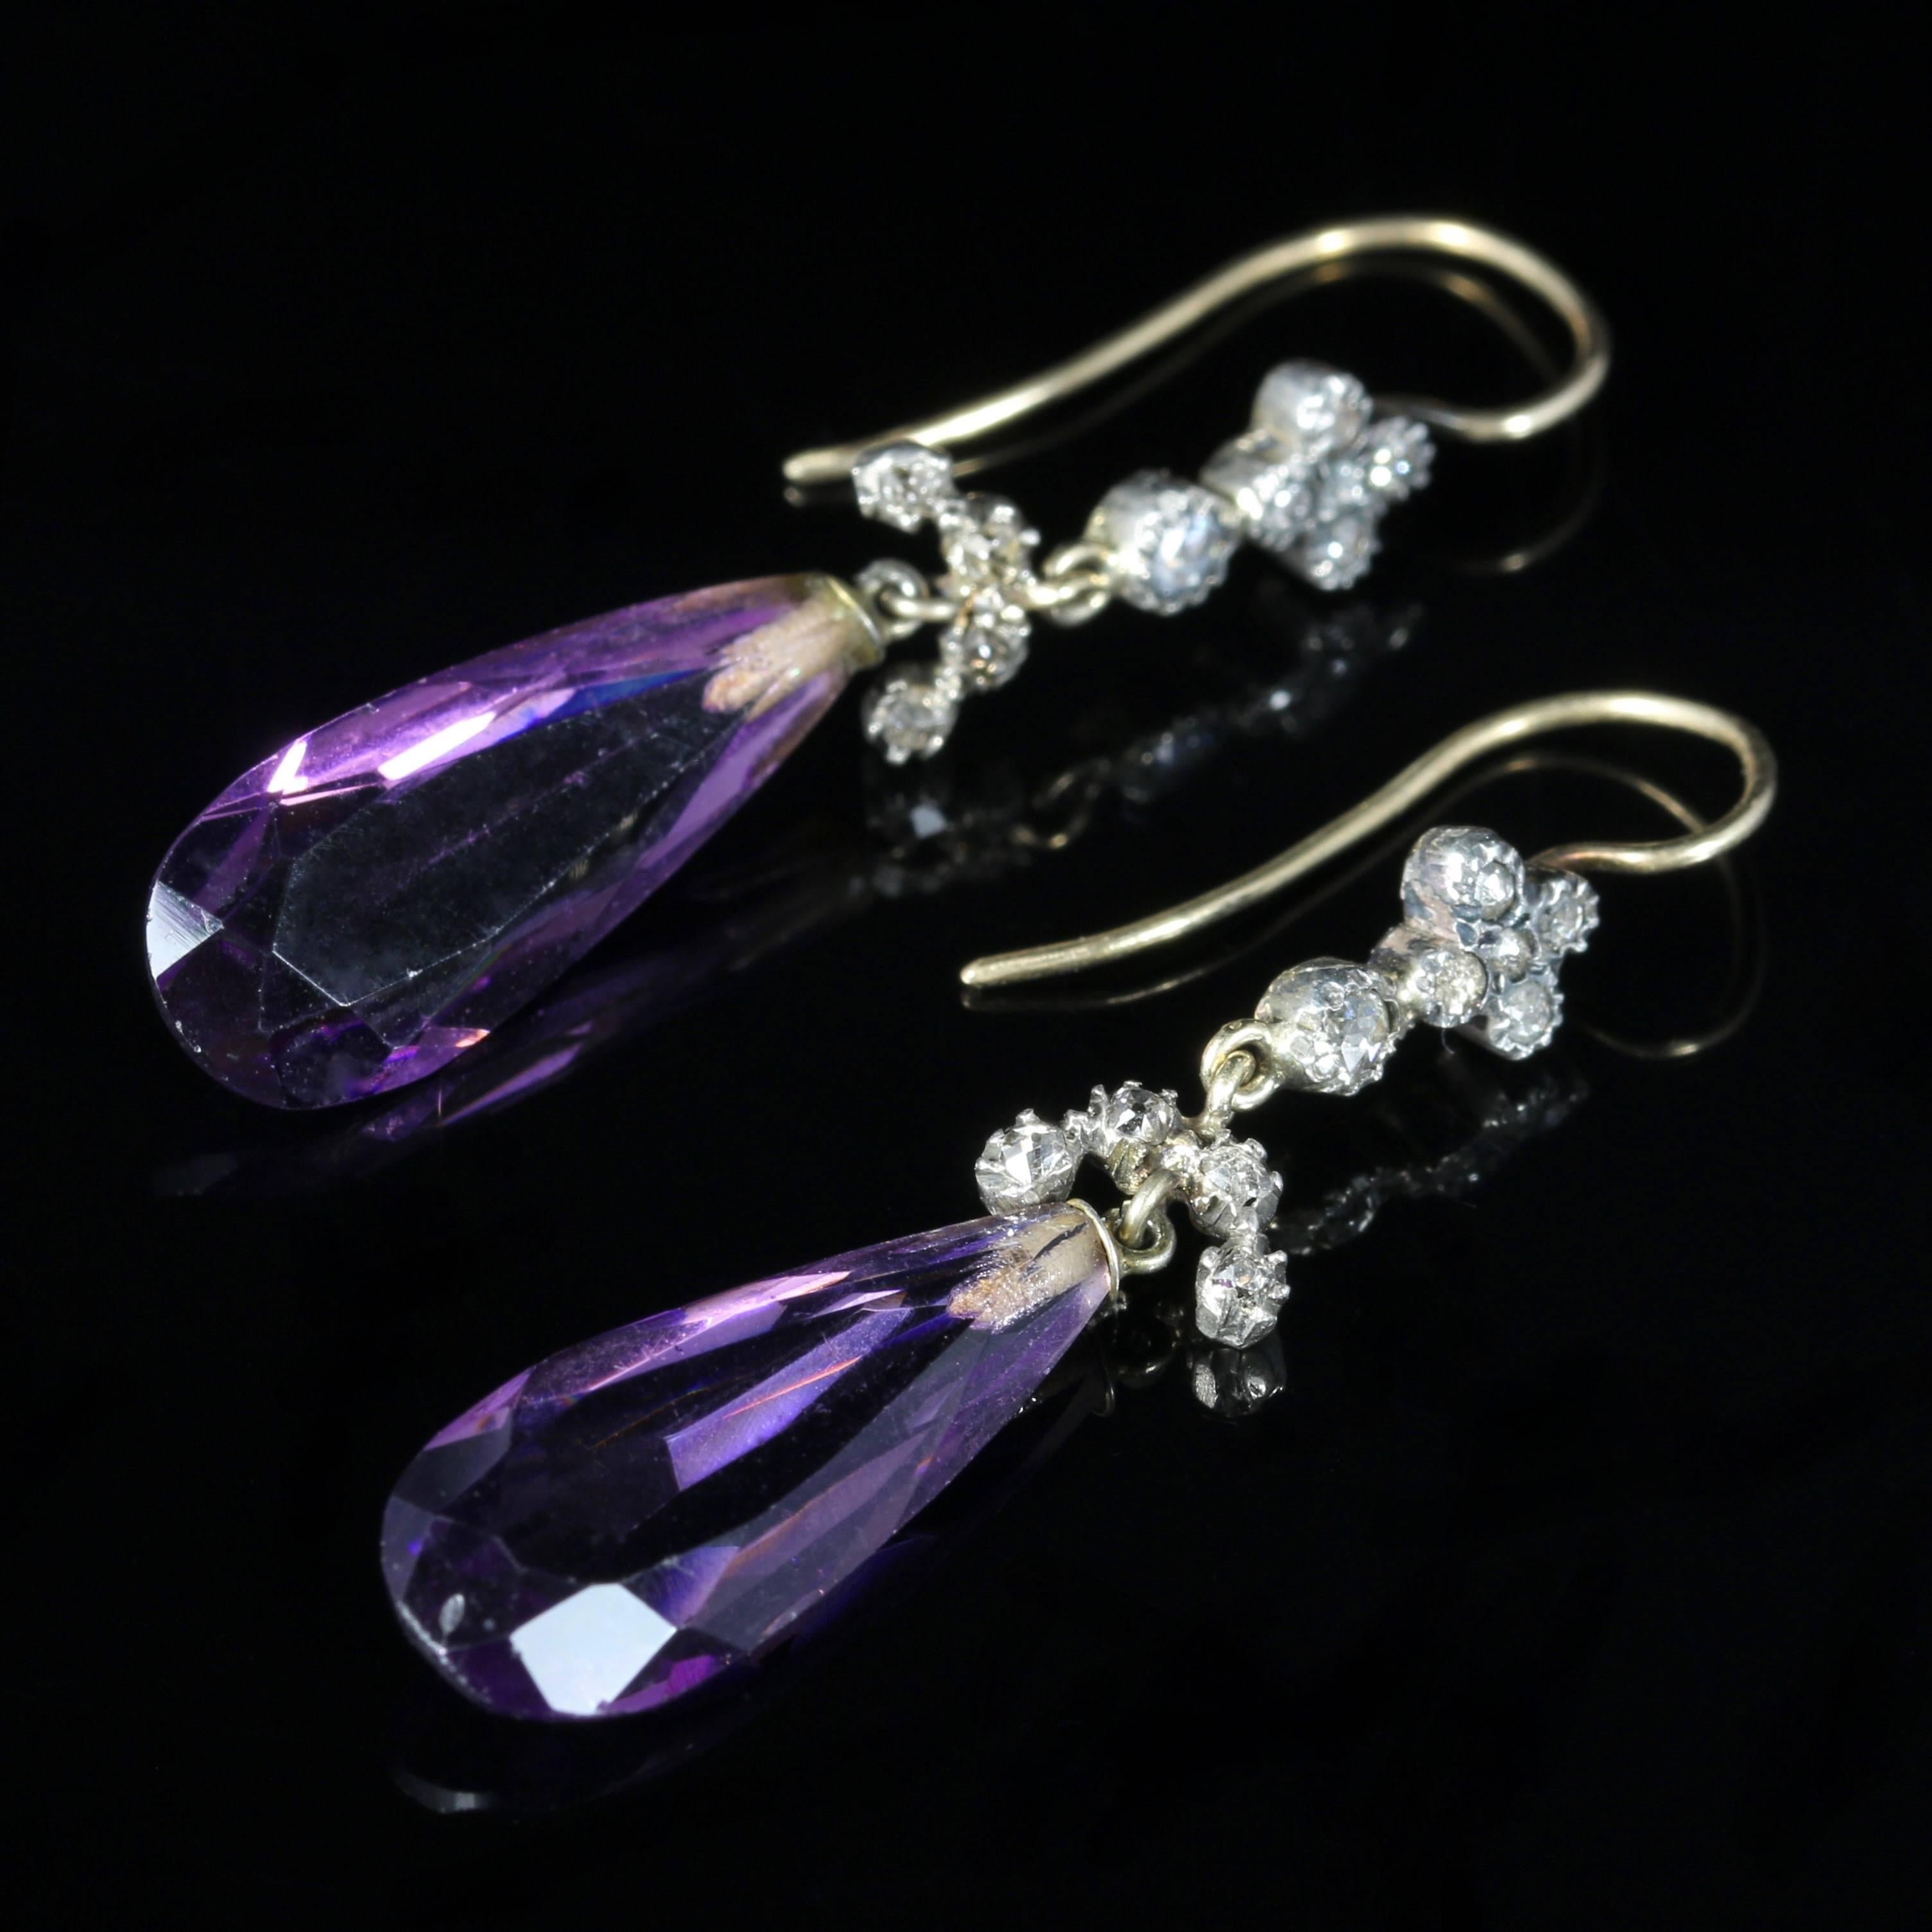 For more details please click continue reading down below...

These gorgeous 18ct Yellow Gold earrings are set with Amethysts and Old Cut Diamonds.

Circa 1880

The Diamonds are lovely and sparkly leading to a beautiful briolette cut Amethyst which